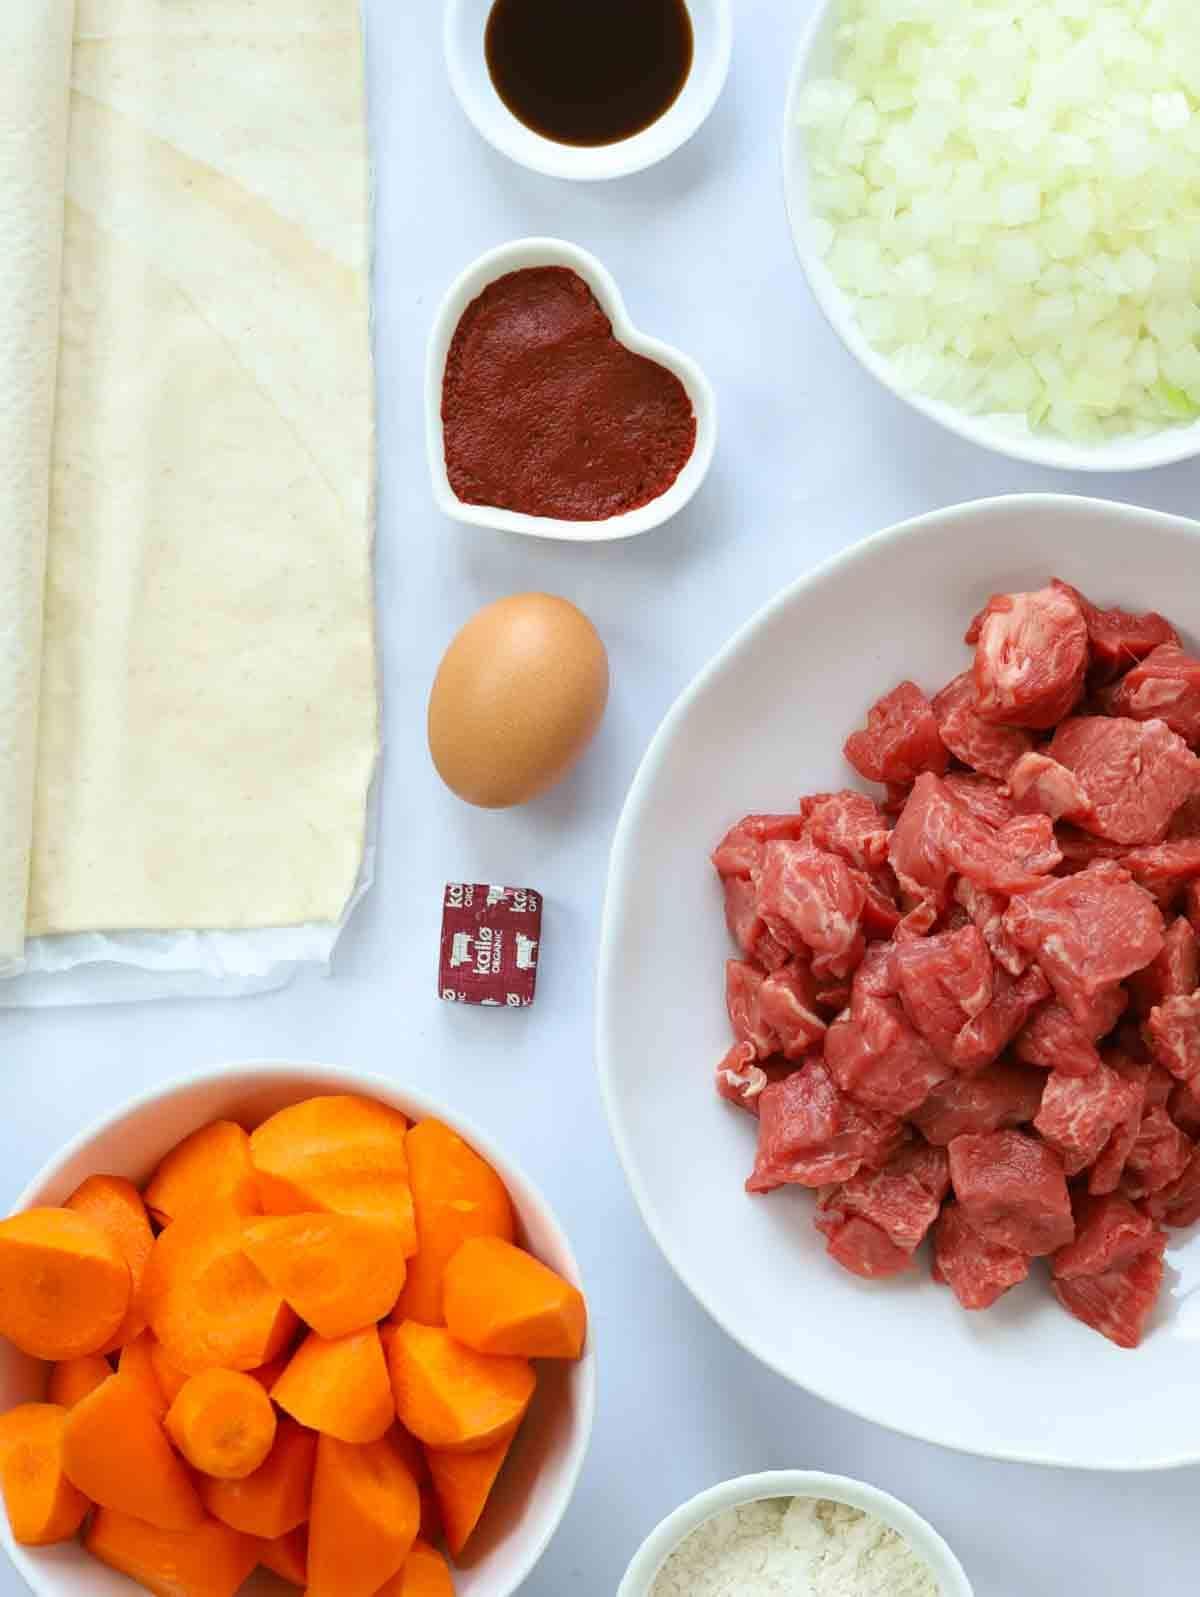 The ingredients for a steak pie recipe laid out on a white tablecloth, including diced beef, carrots, onion, egg, pastry, stock cube, tomato puree and Worcester sauce.